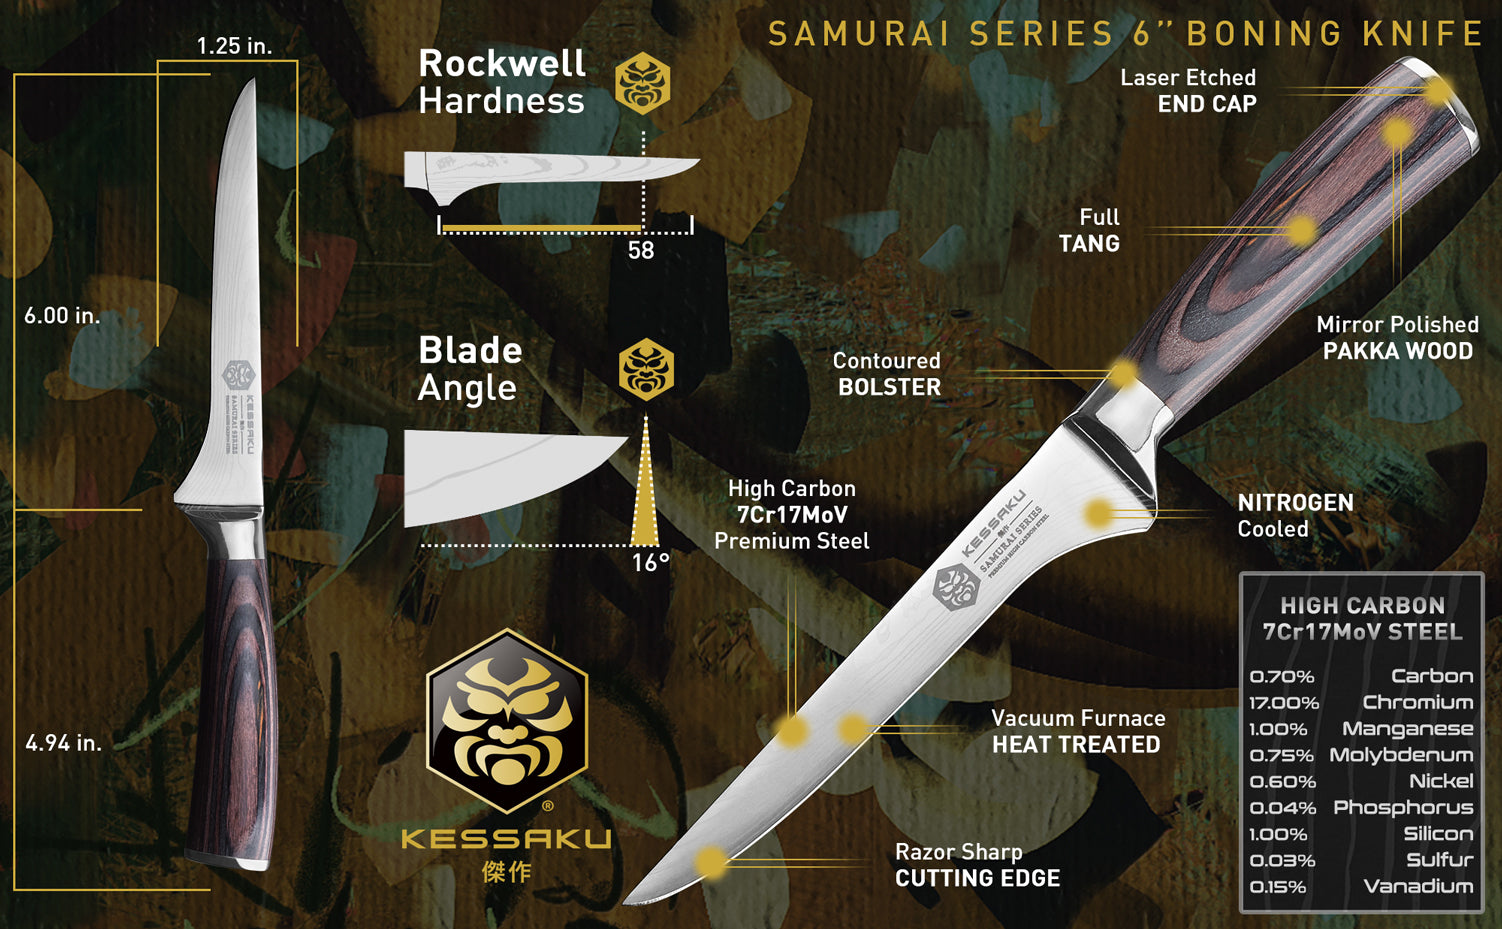 The Kessaku Samurai Series 6-Inch Boning Knife's features, dimensions, and steel composition